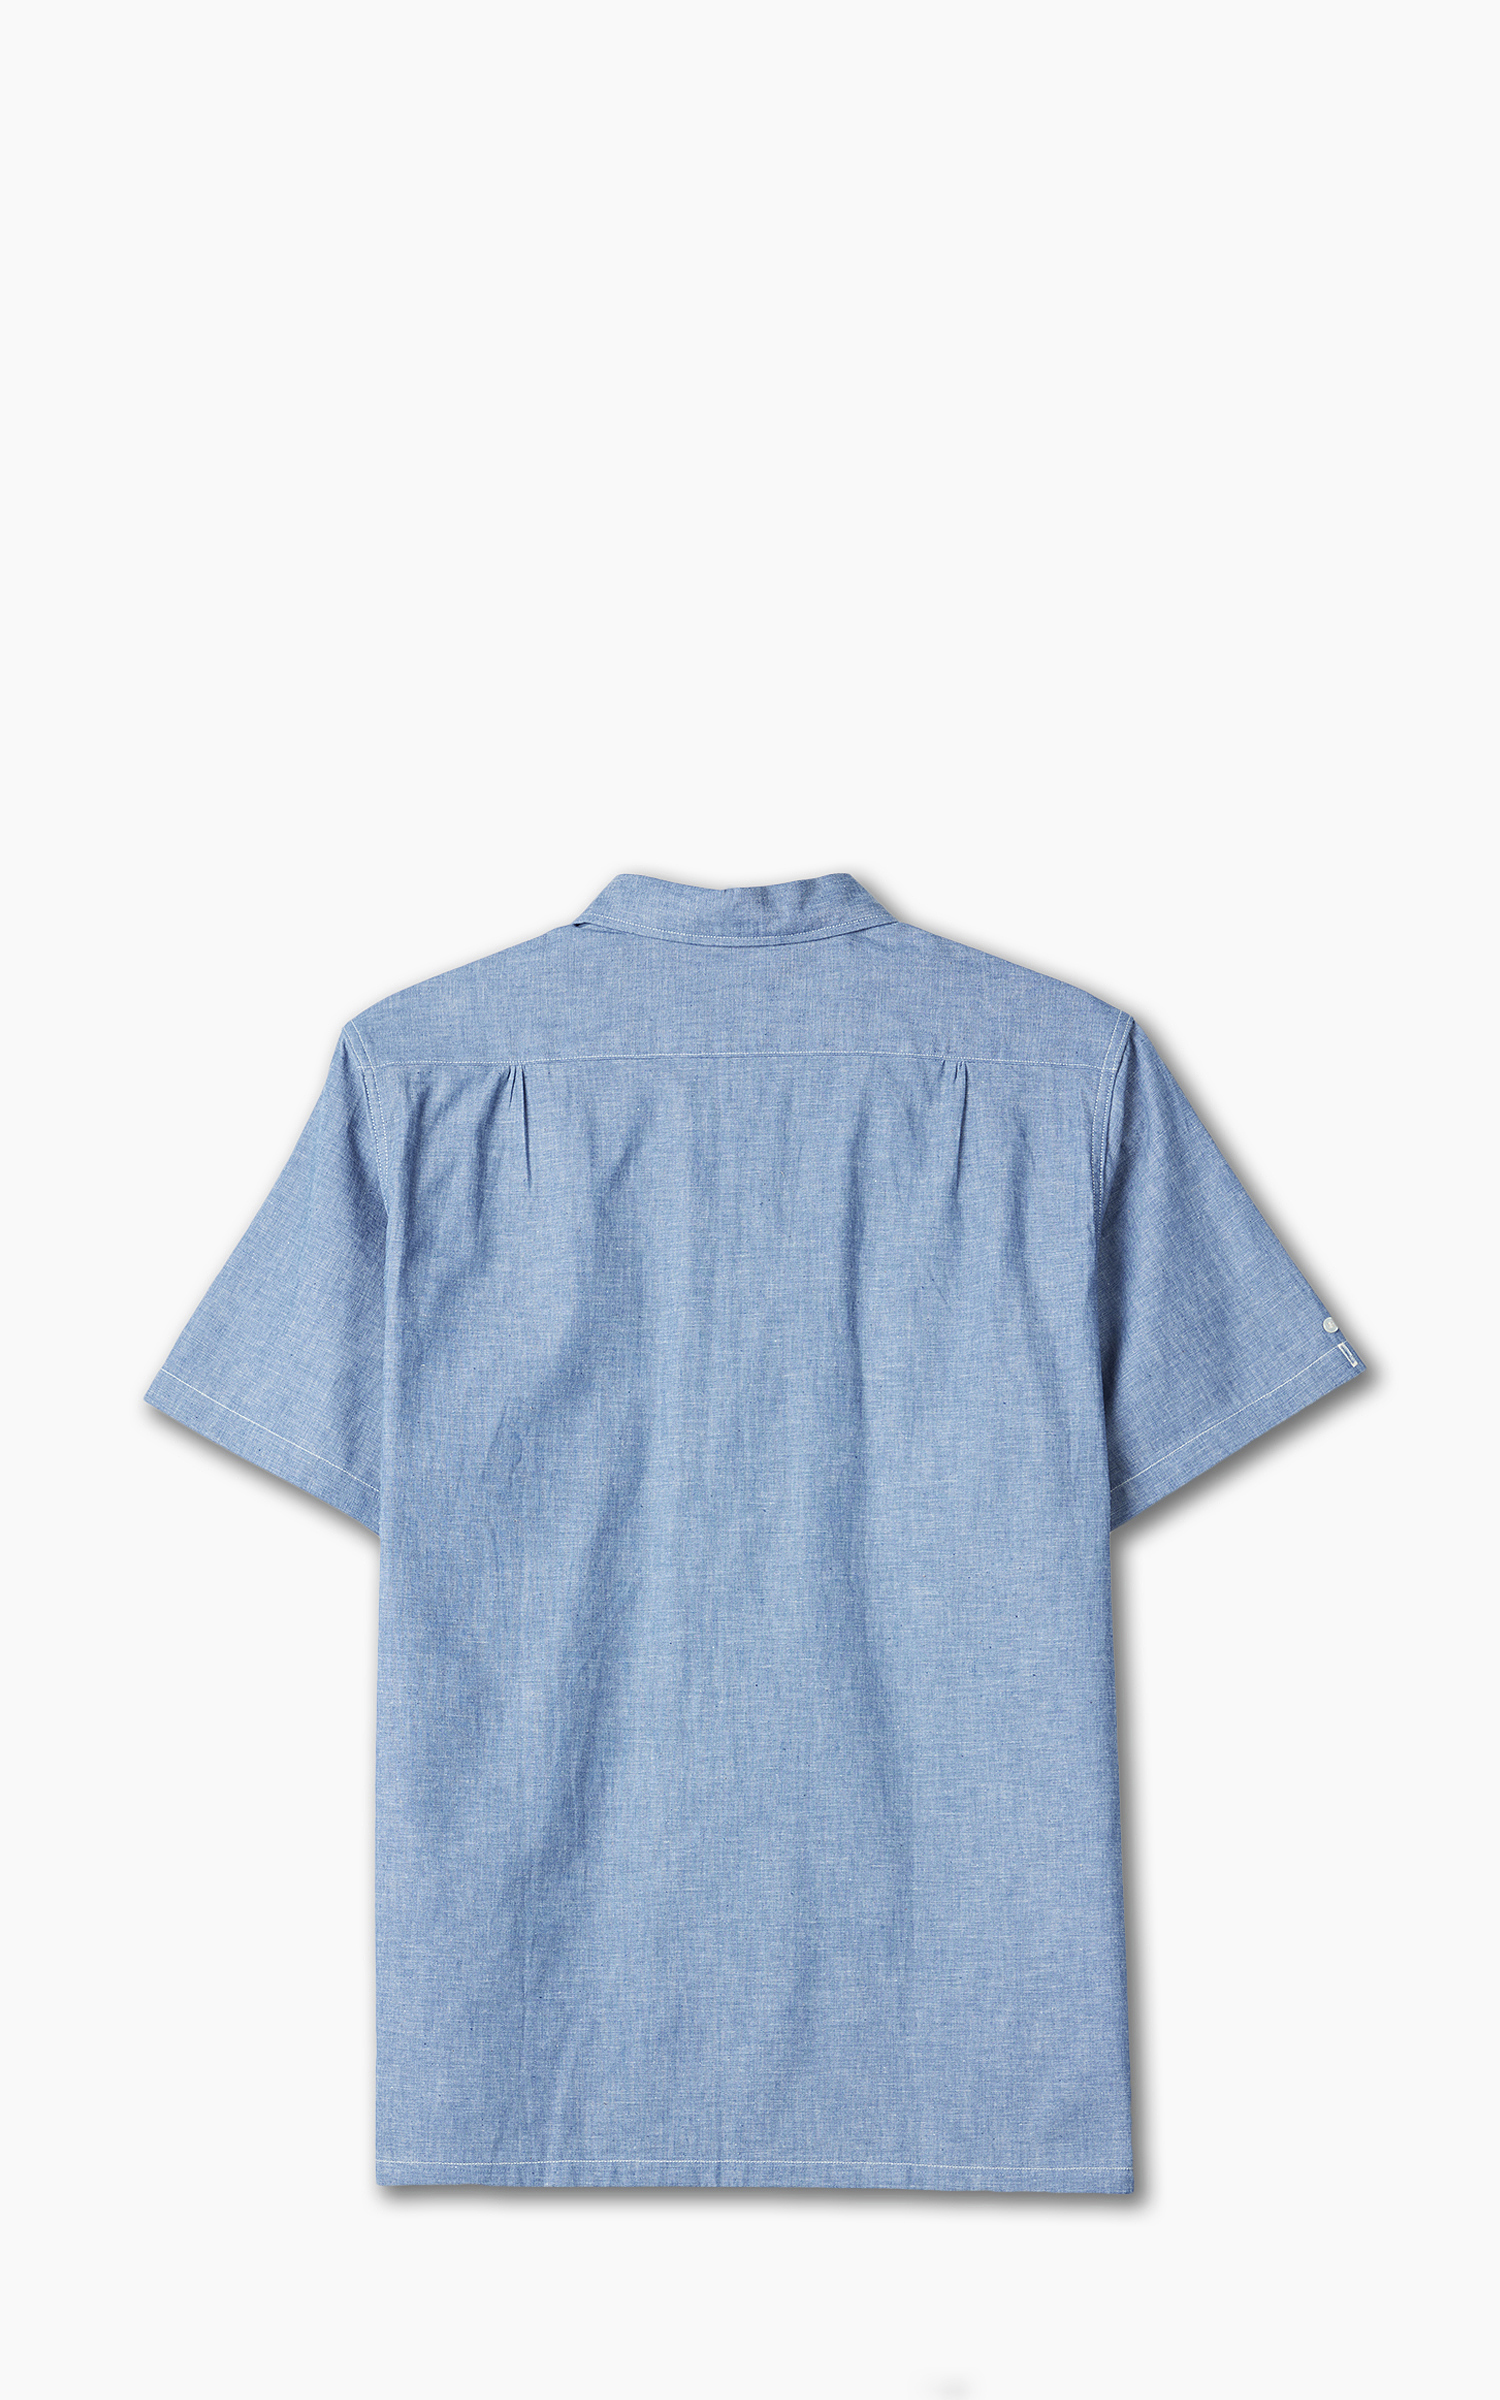 Spread Collar Sport Shirt in Extra Light Washed Chambray